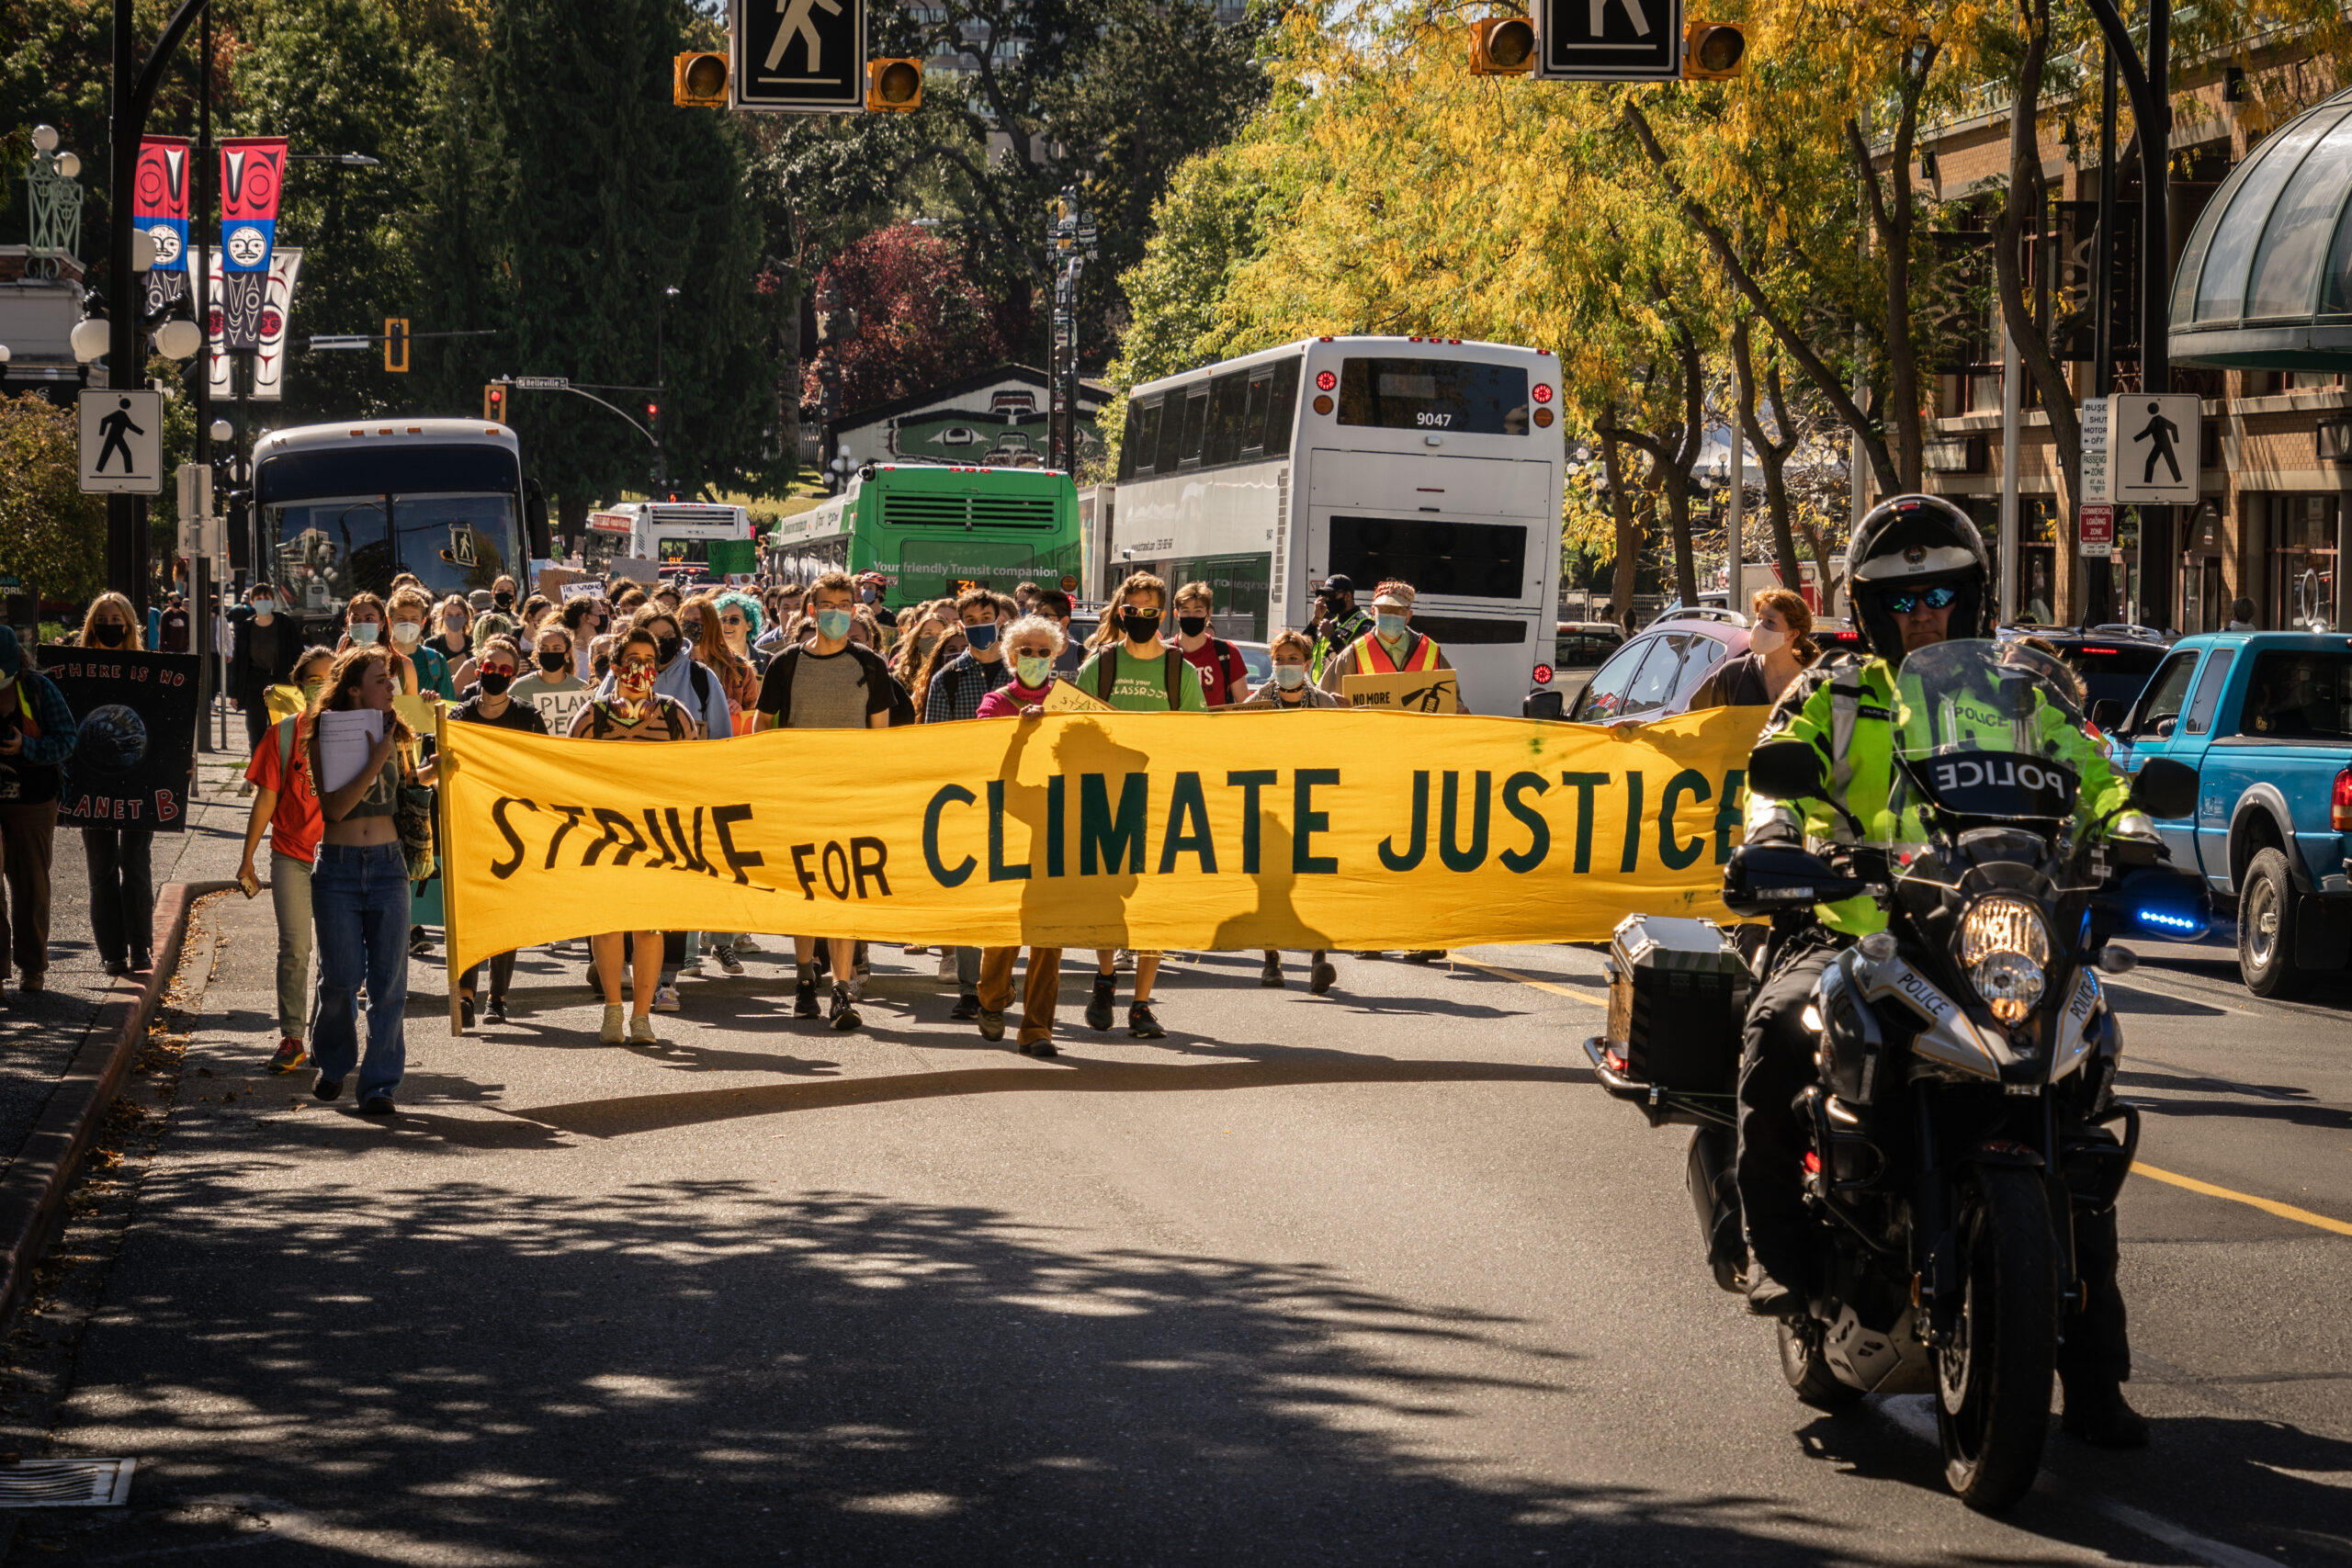 A climate strike banner reading "strike for climate justice".